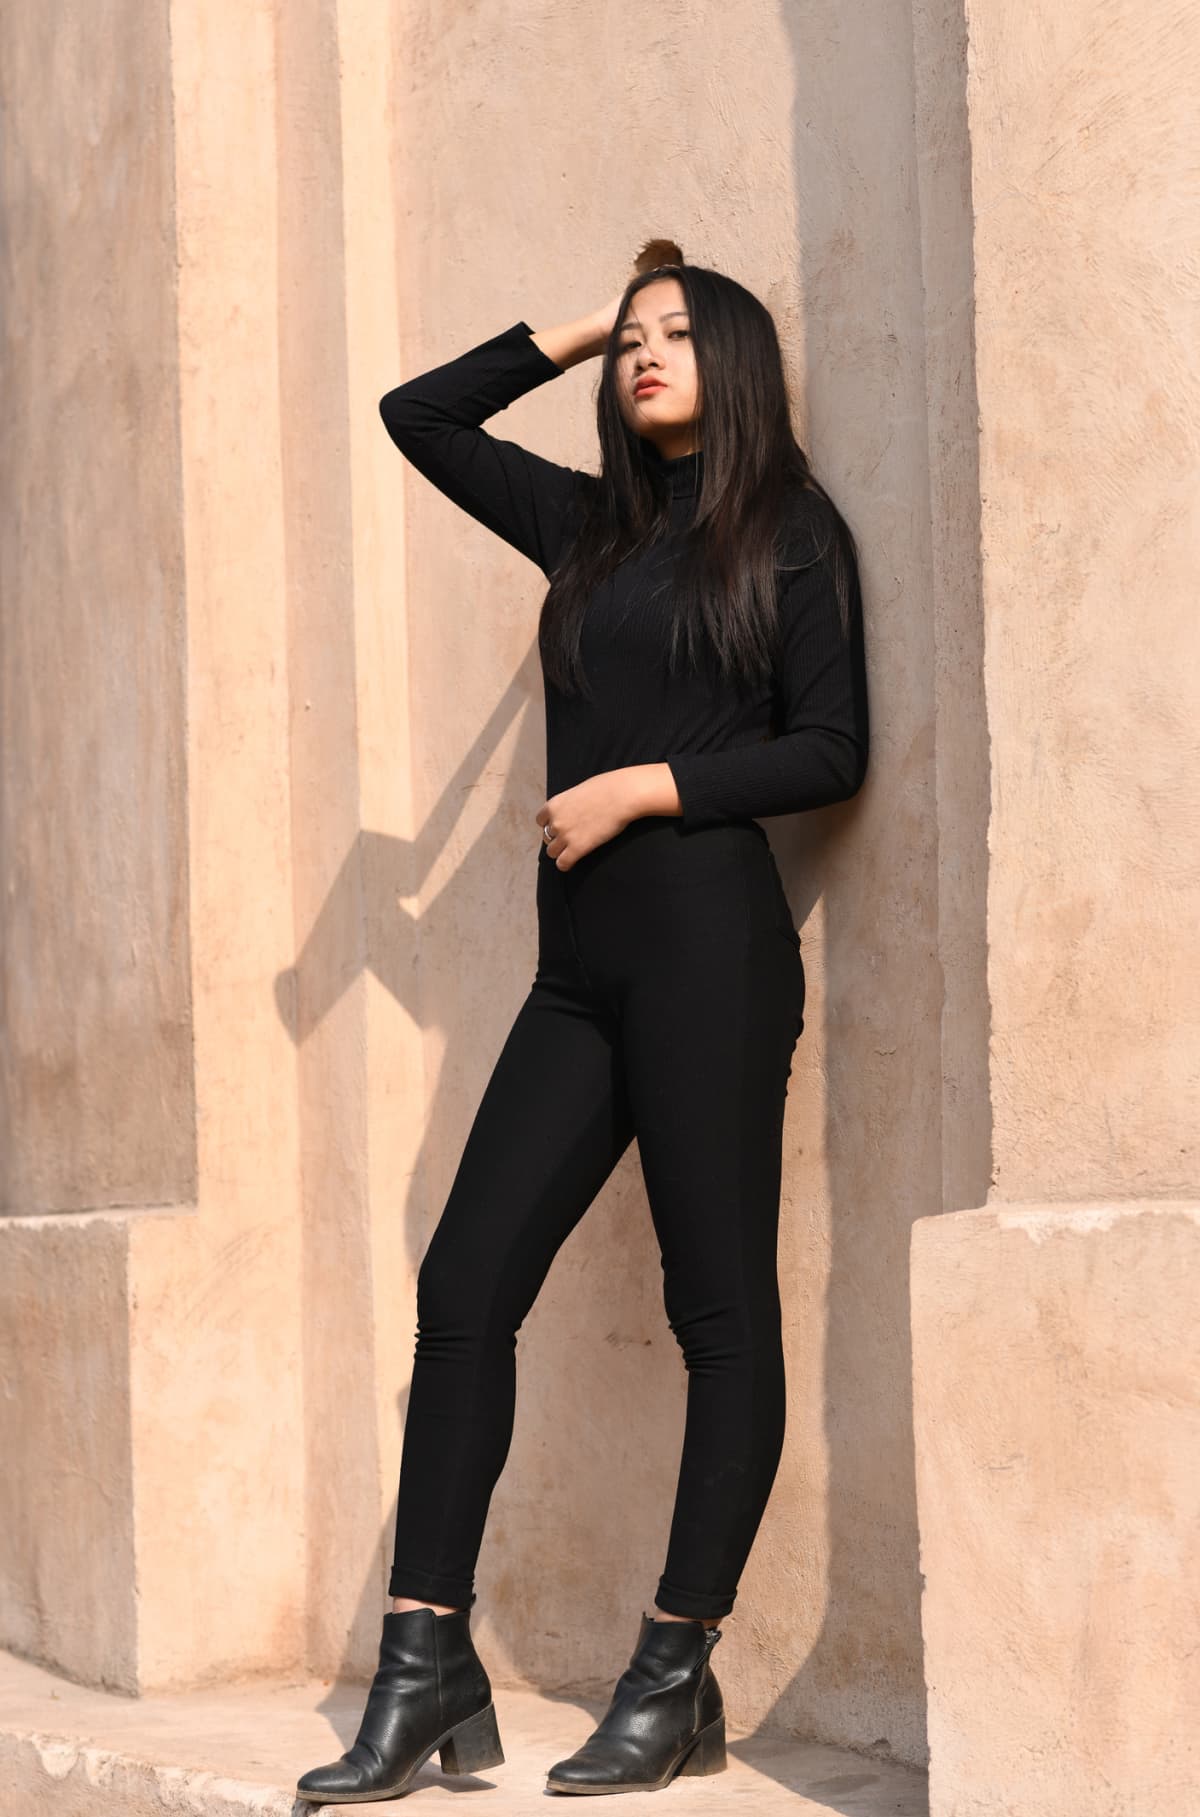 Woman poses against a wall wearing a black bodysuit with black leggings and boots